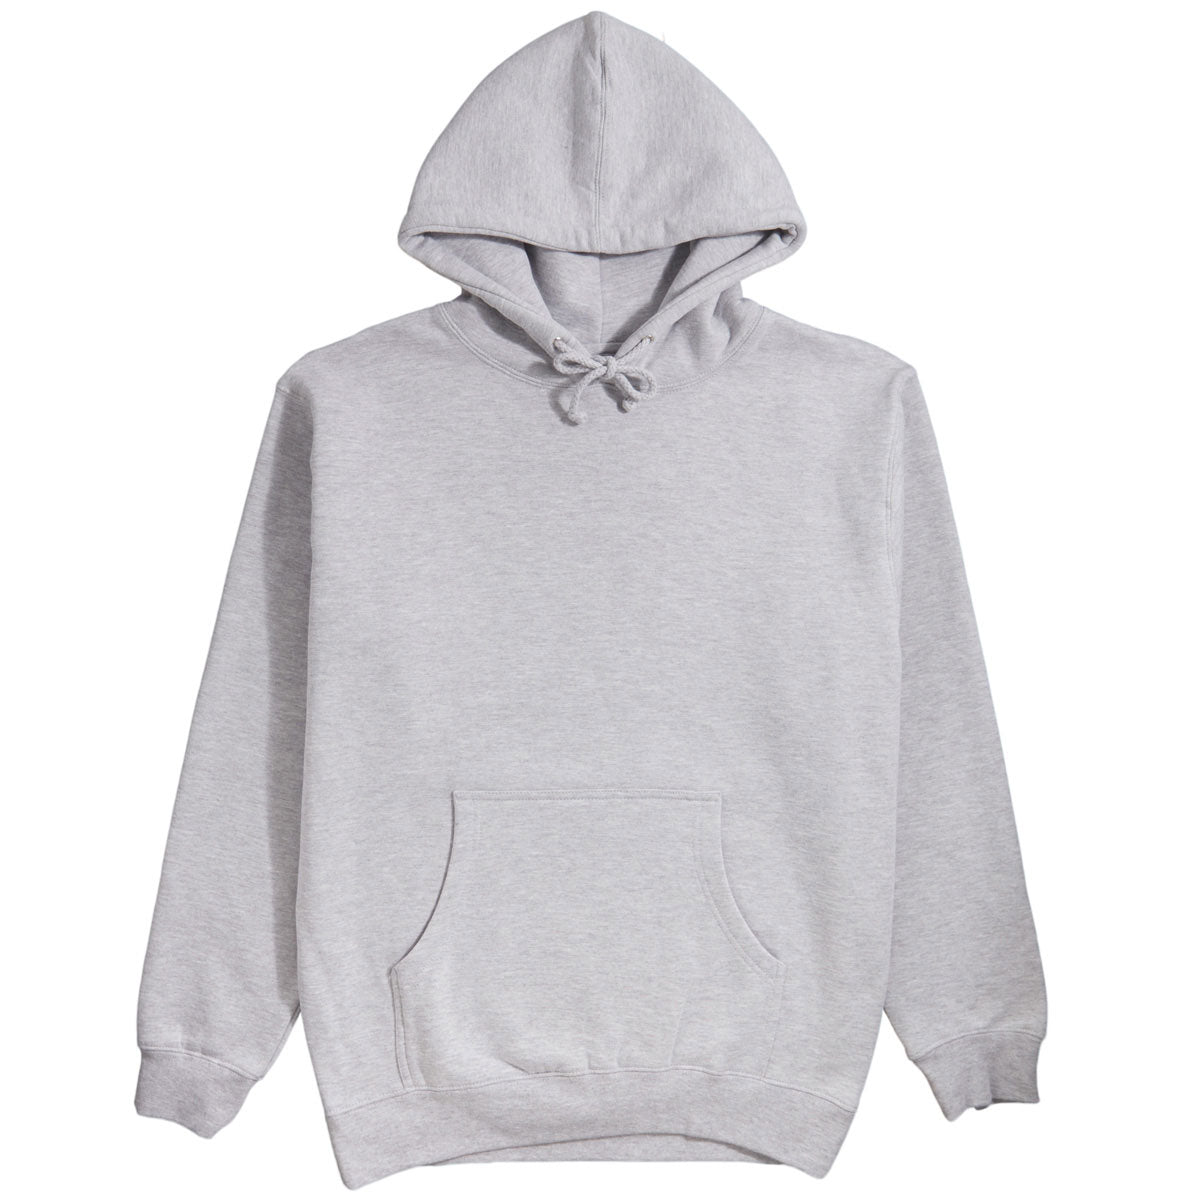 Converse Body Horror Pullover Hoodie - Heather Grey - LG image 1